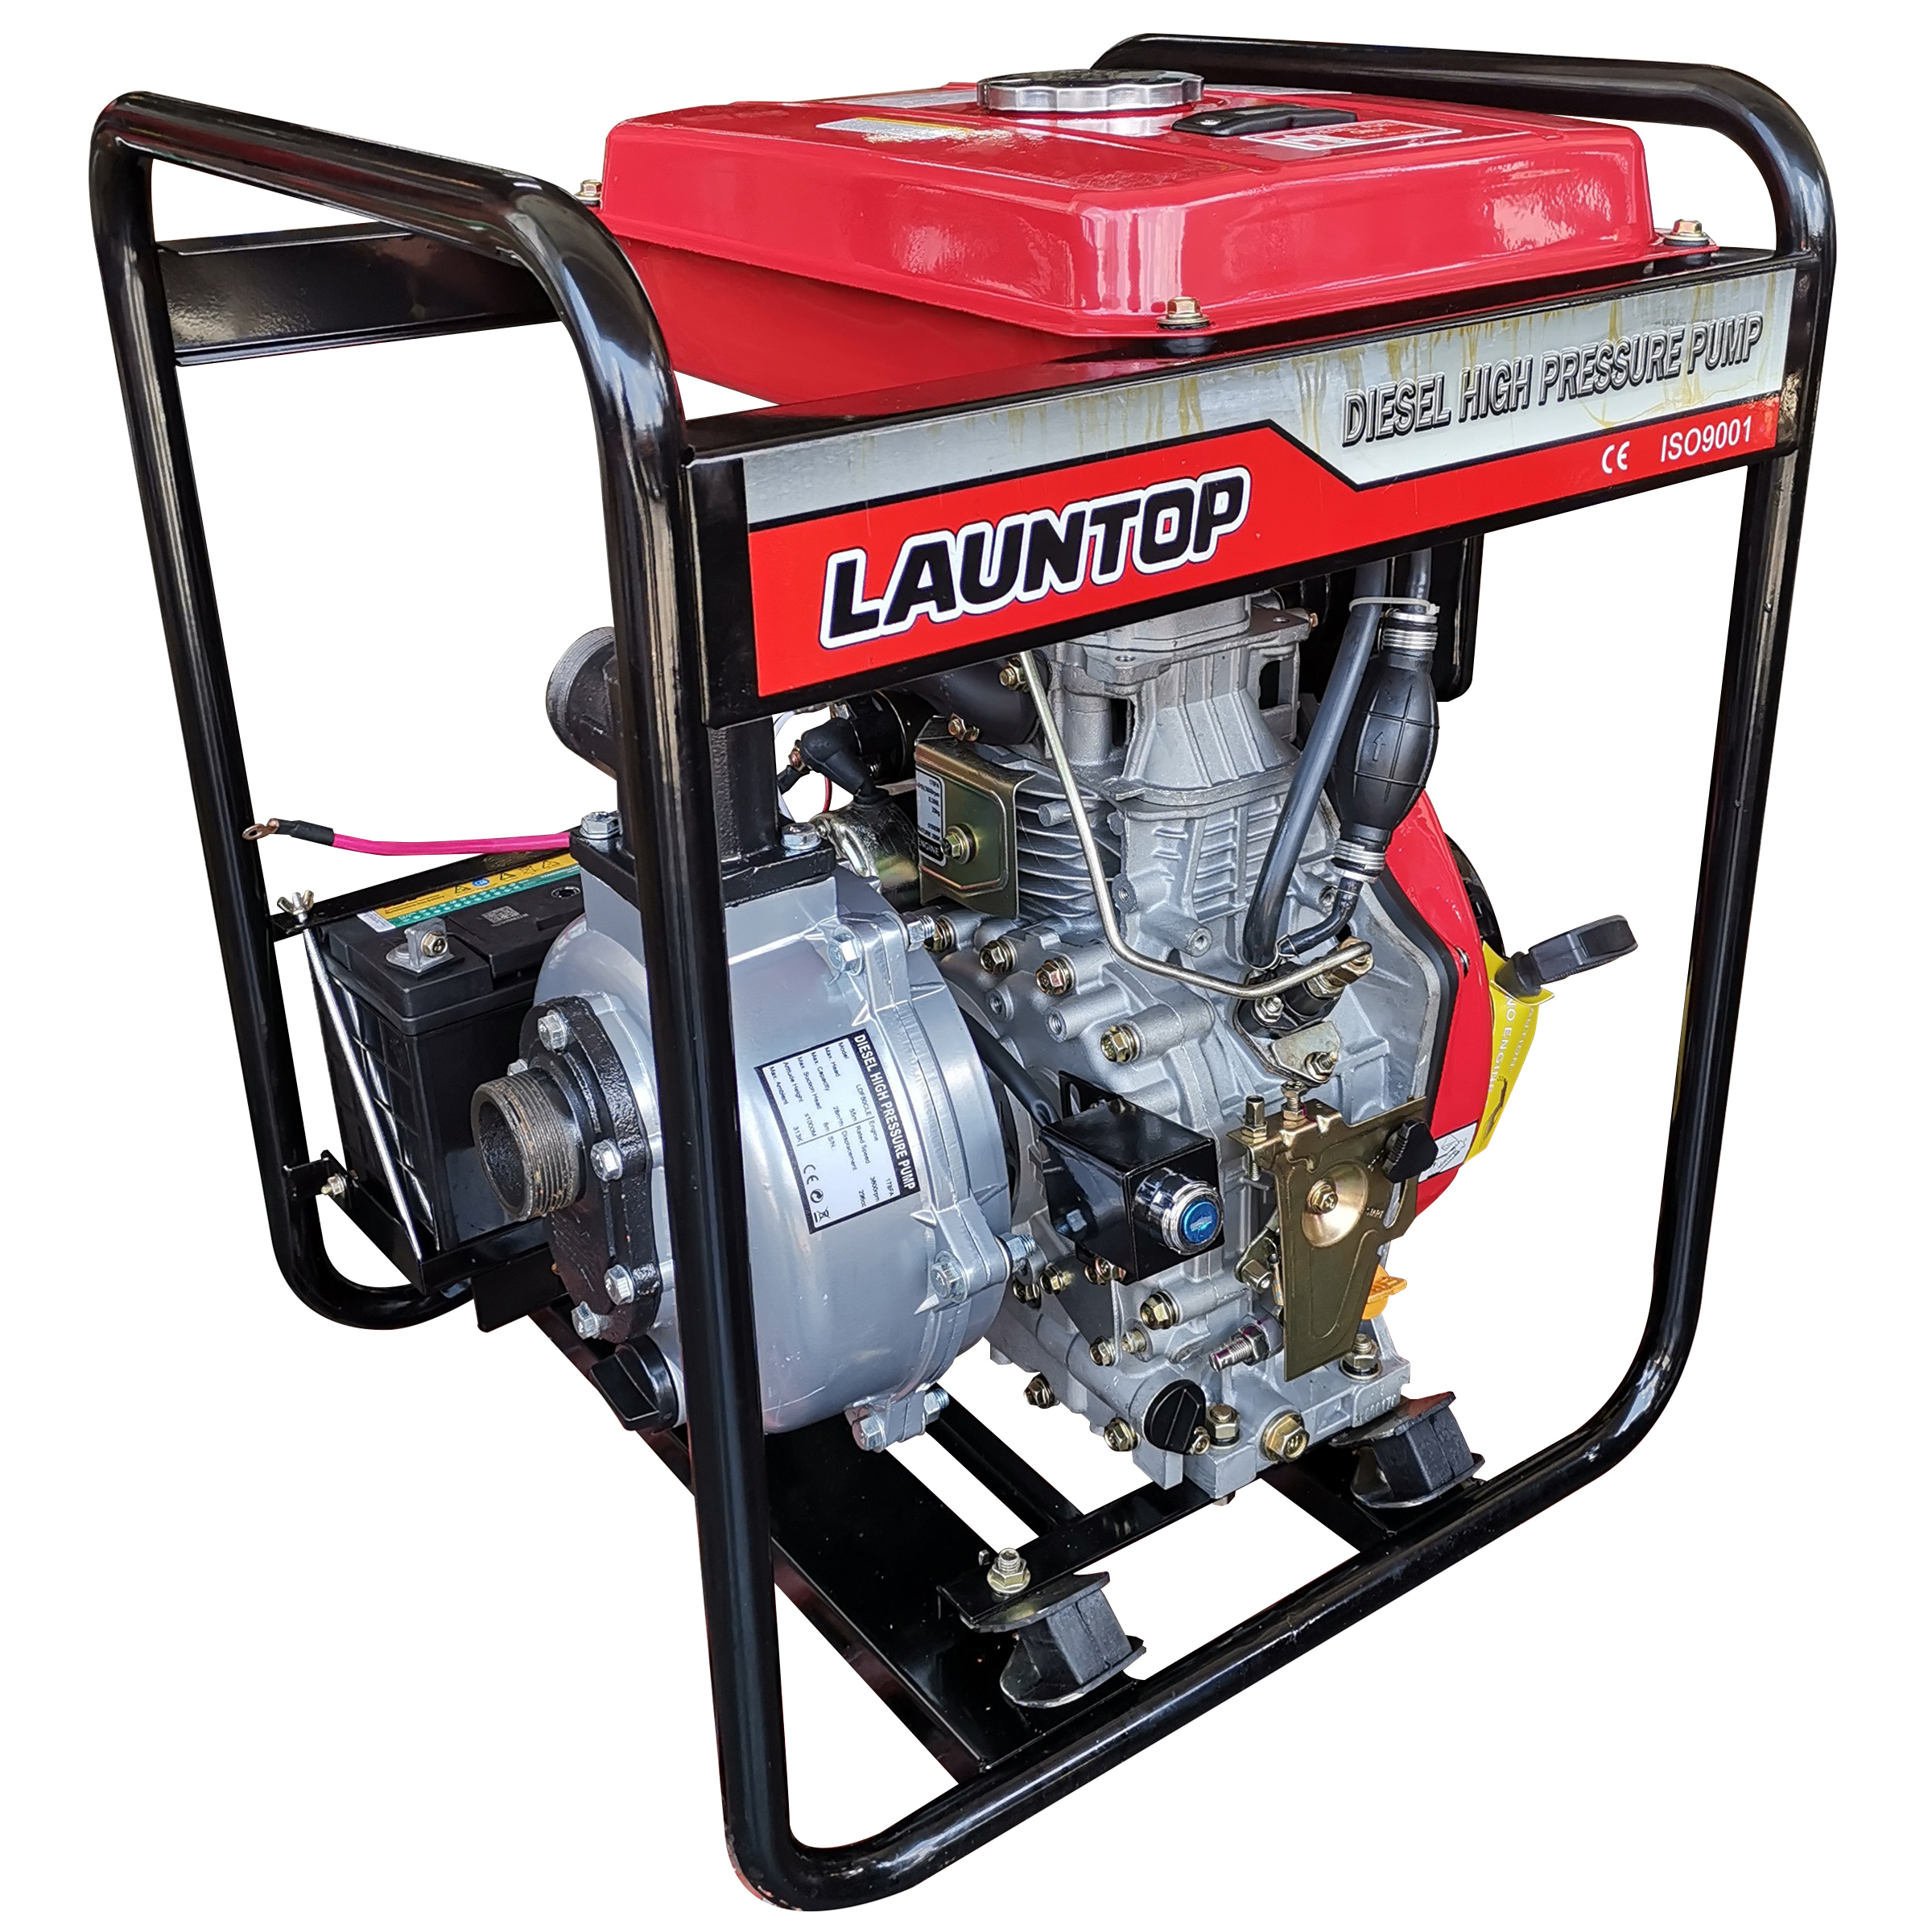 Launtop LDF80CLE: Water Pump with Diesel Engine - Click Image to Close